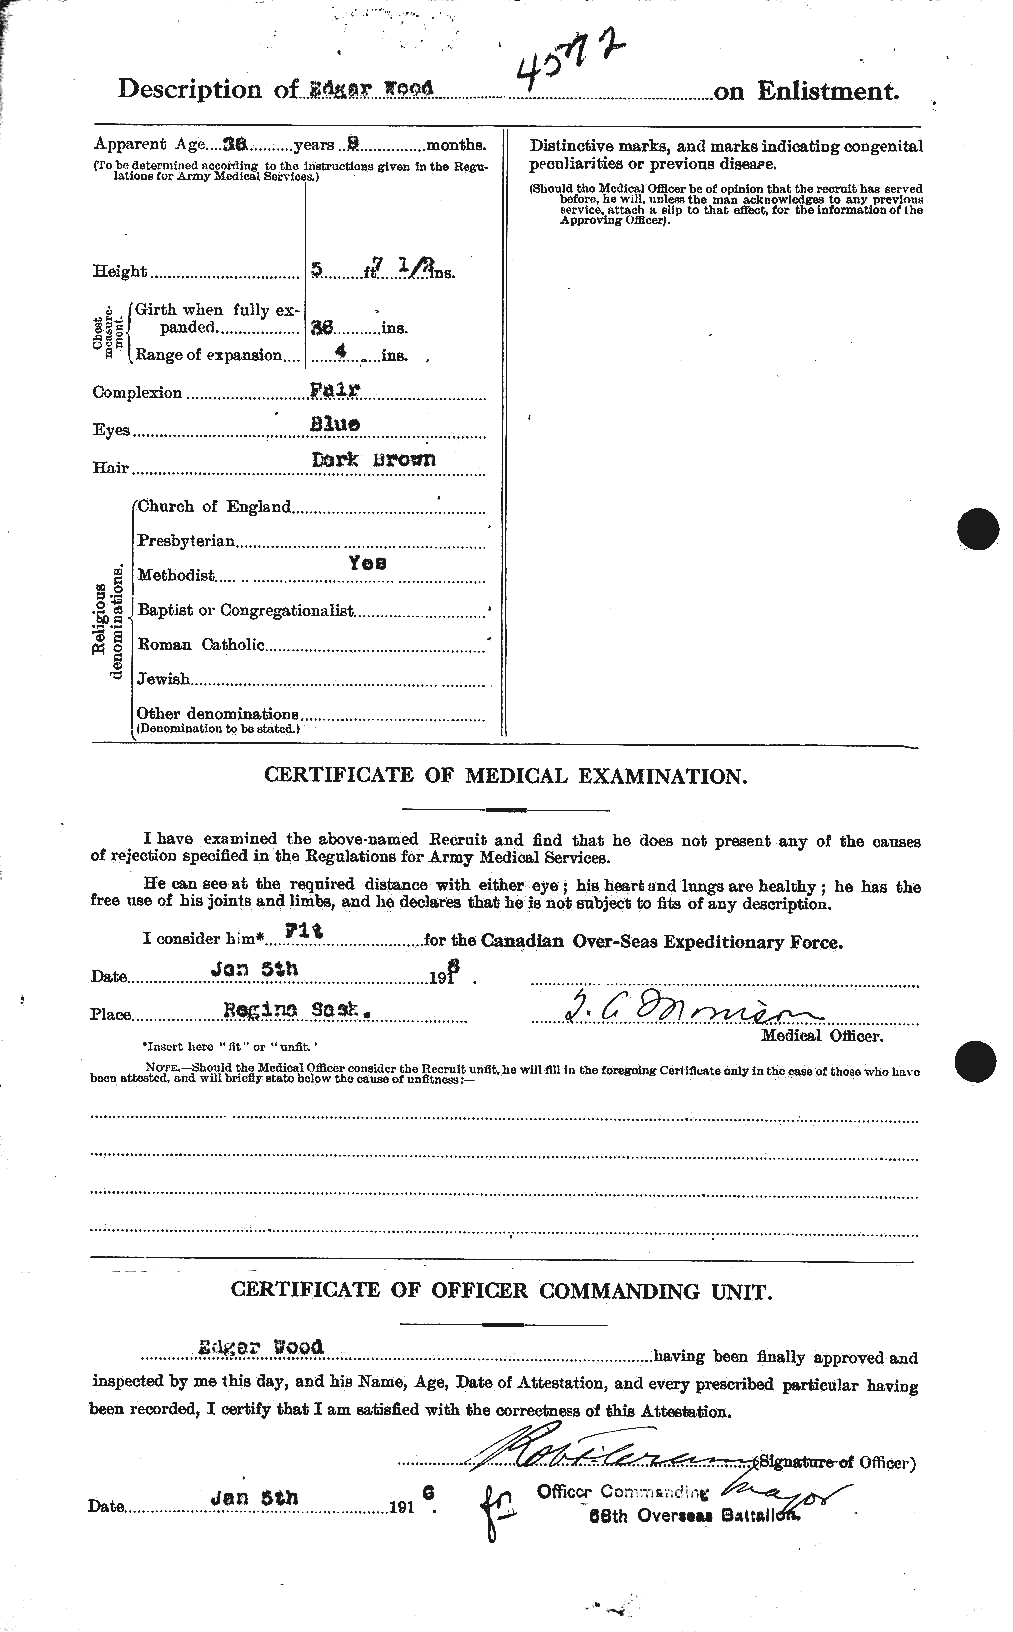 Personnel Records of the First World War - CEF 682973b